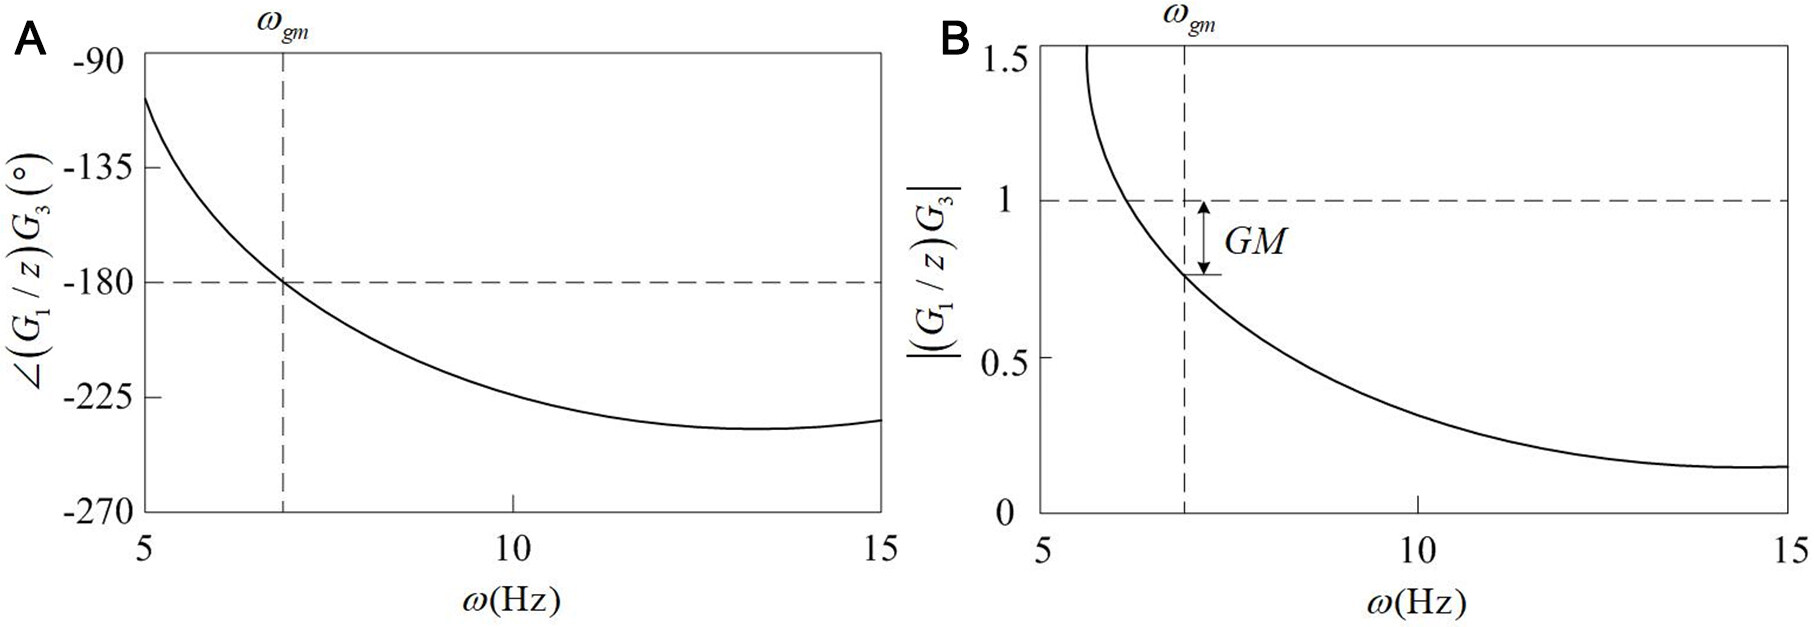 Time-domain instability mechanism for artificial boundary condition of semi-infinite medium described by discrete rational approximation